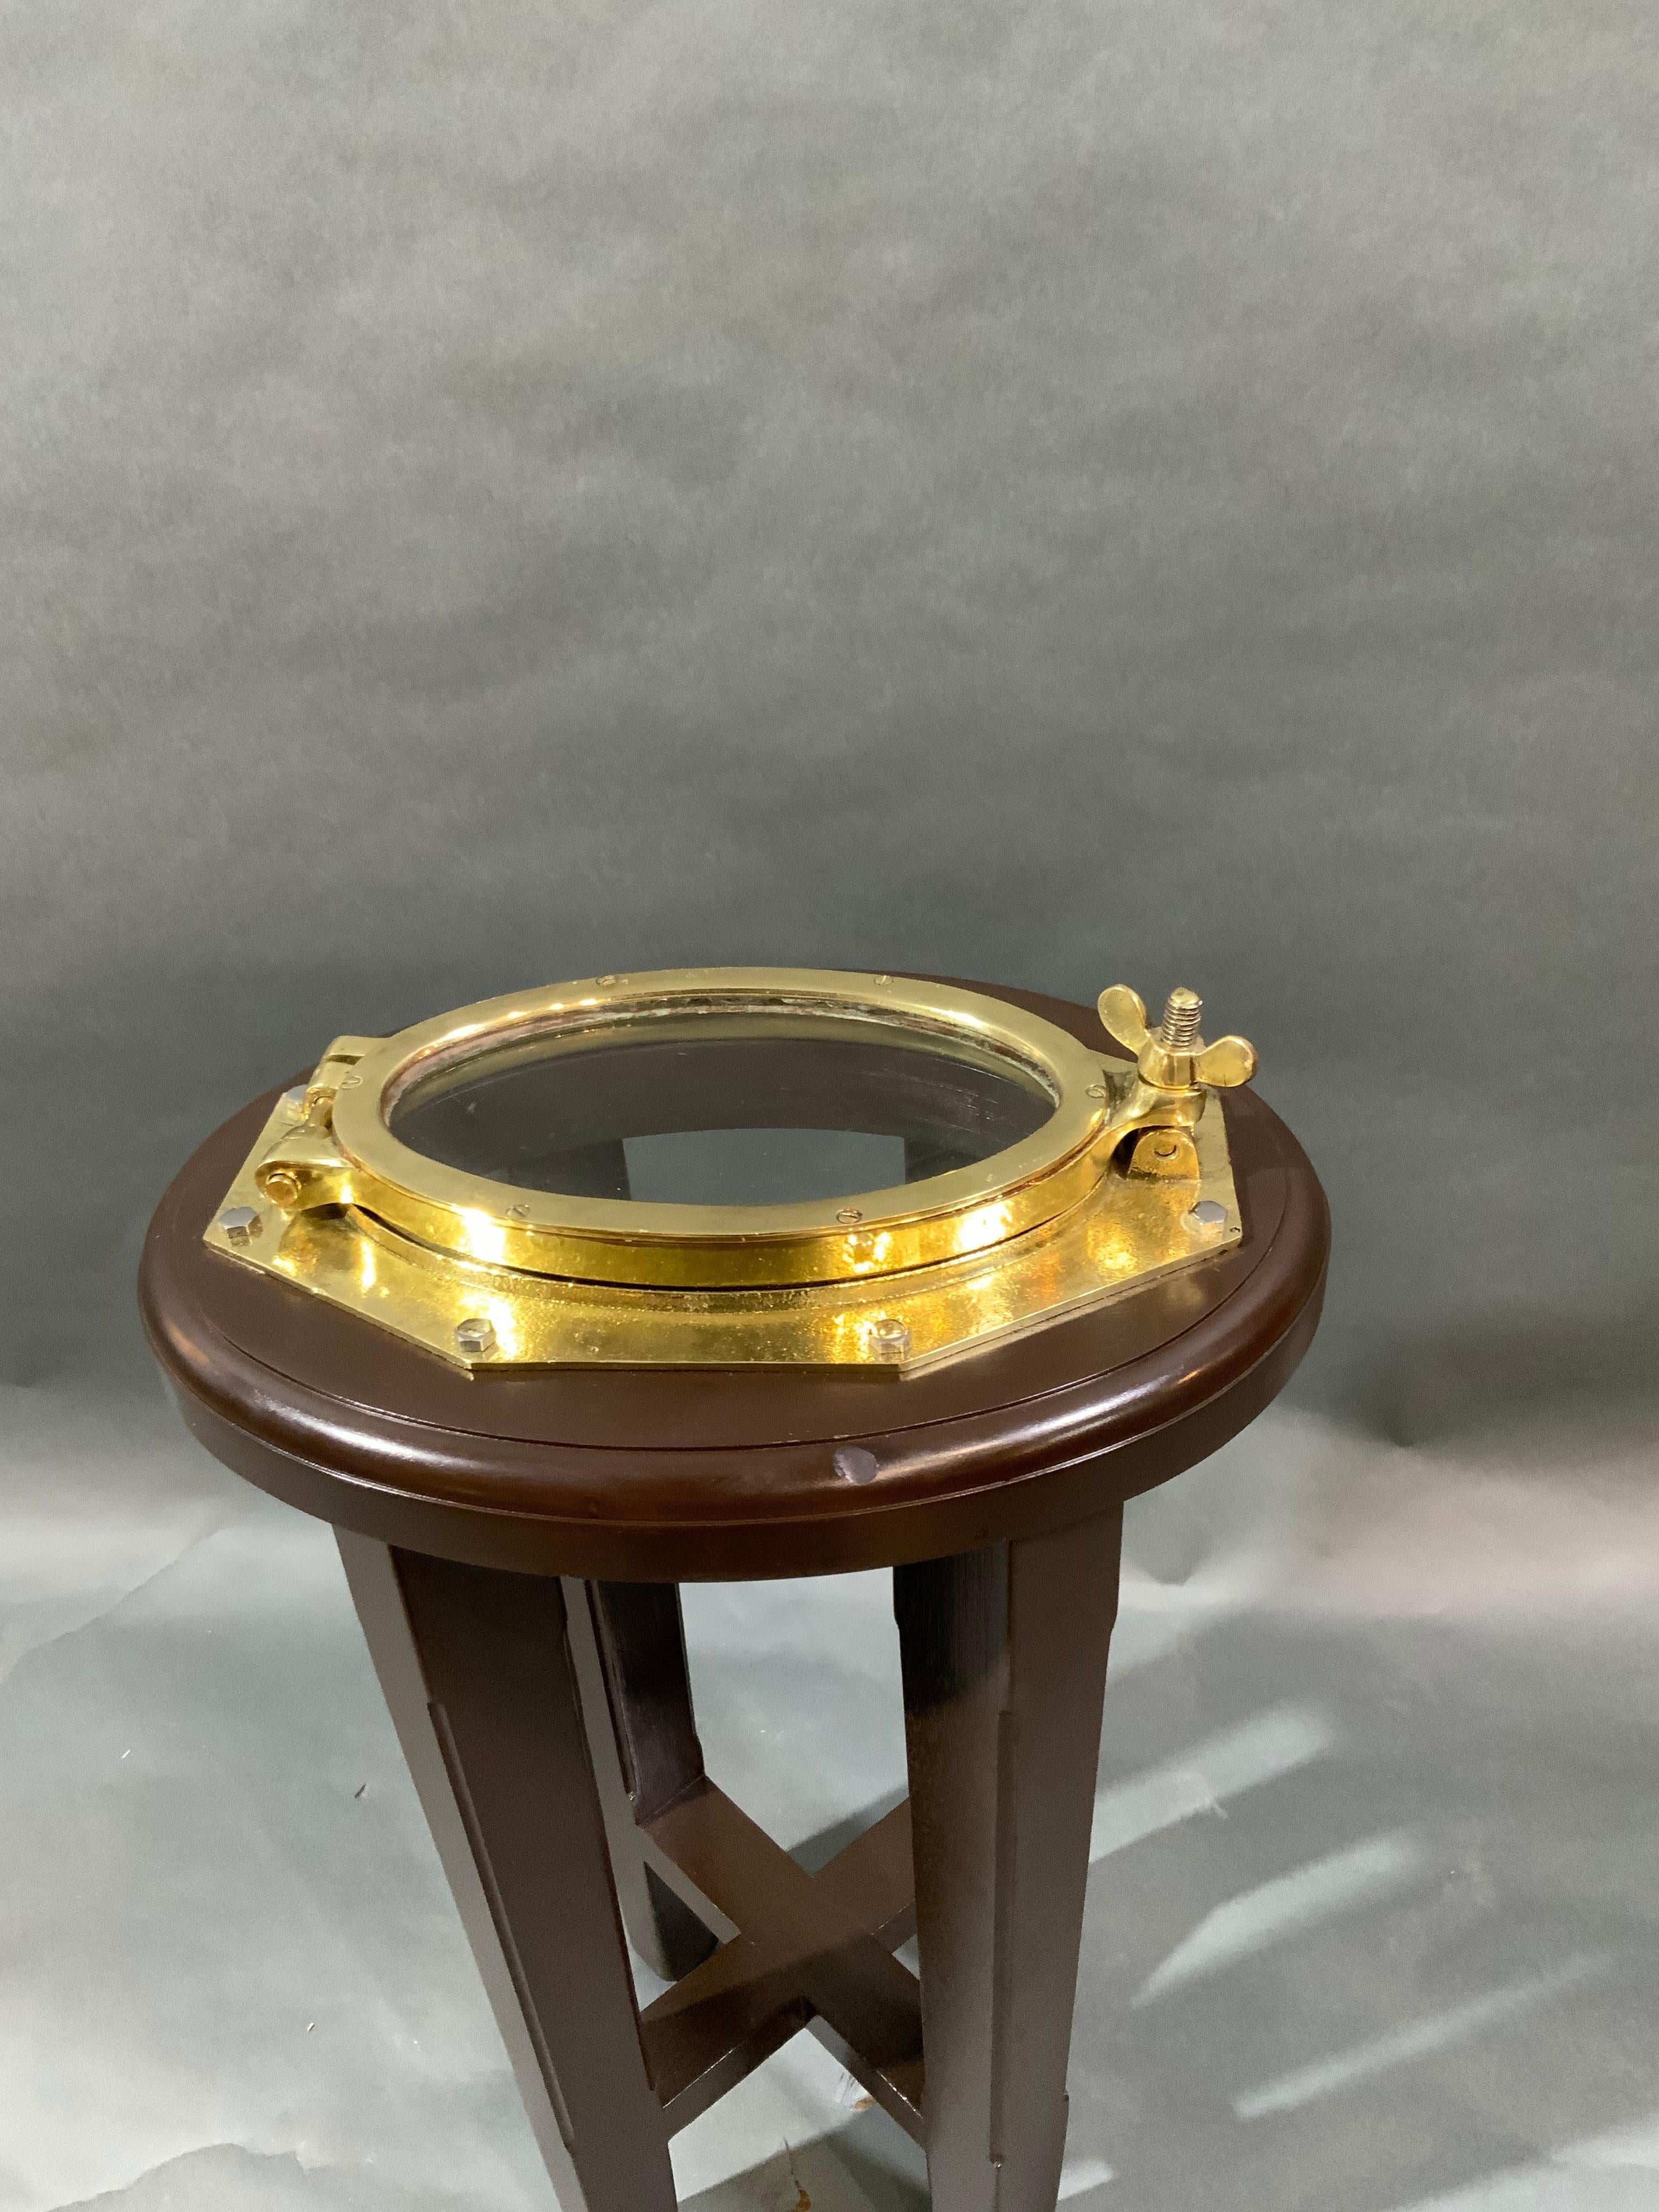 Authentic Solid Brass Boat Porthole Table In Excellent Condition For Sale In Norwell, MA